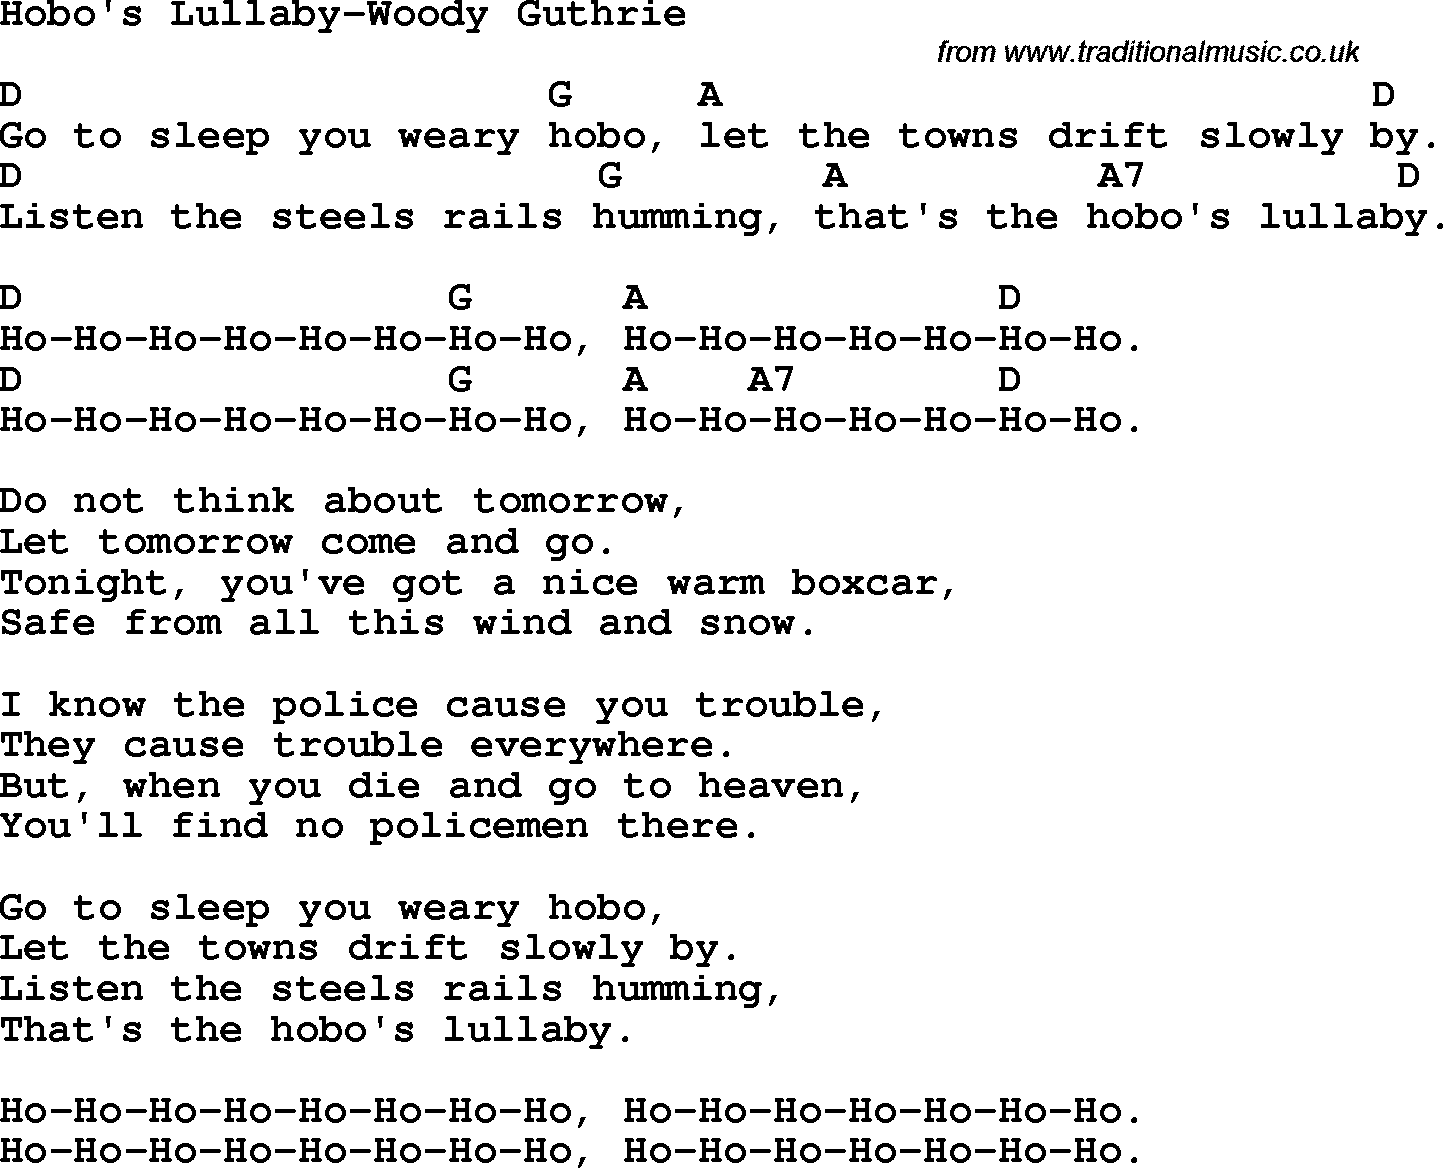 Protest Song Hobo's Lullaby-Woody Guthrie lyrics and chords